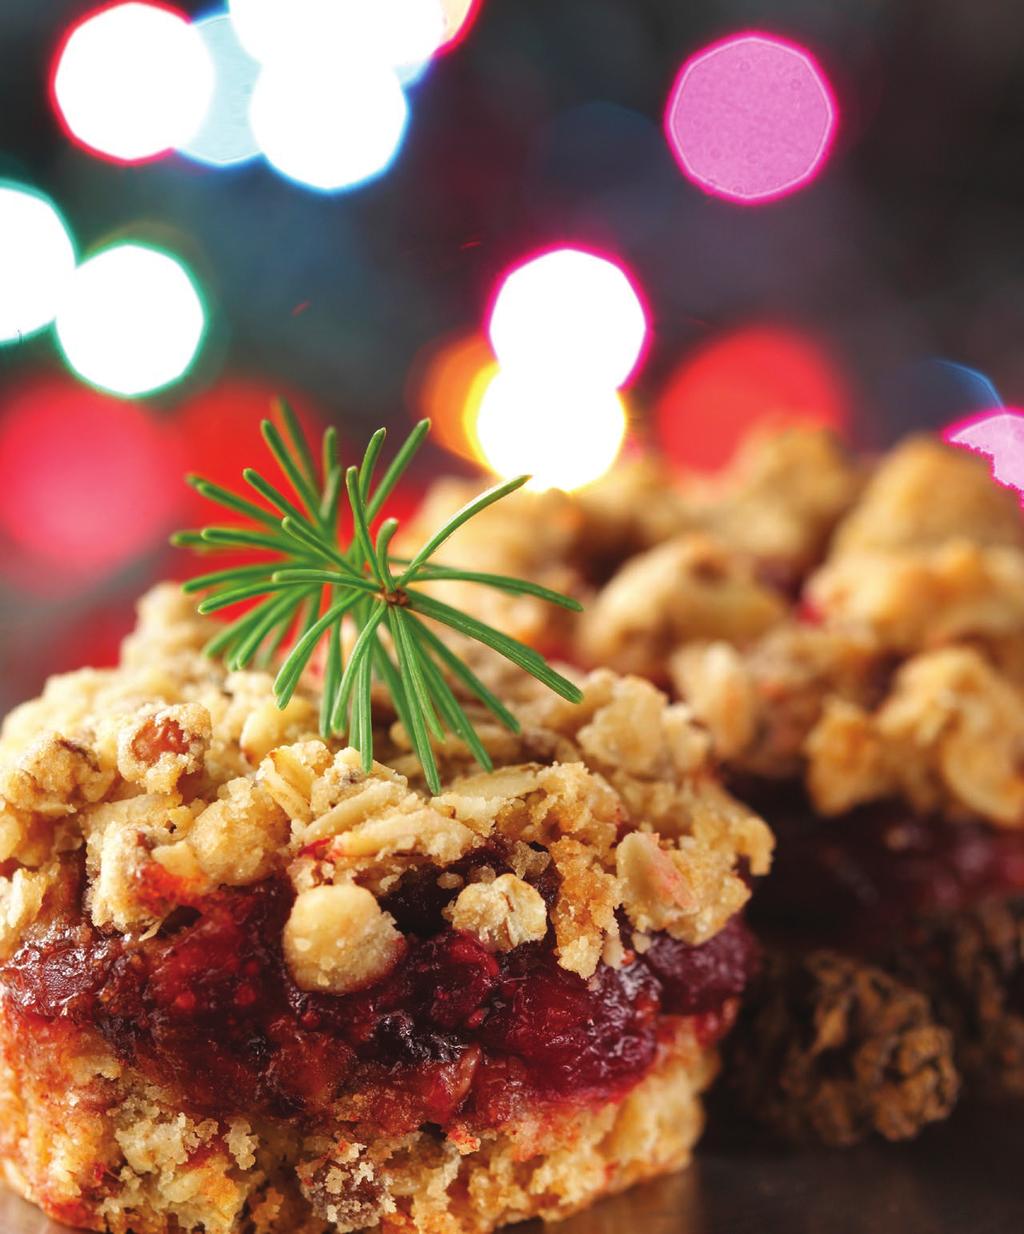 CRANBERRY-DATE CRUMBLE SQUARES Base & Topping 1/4 cup (60 ml) red lentils 1 cup (250 ml) all-purpose or whole wheat flour, or a combination 1 cup (250 ml) rolled oats 2 /3 cup (165 ml) packed brown